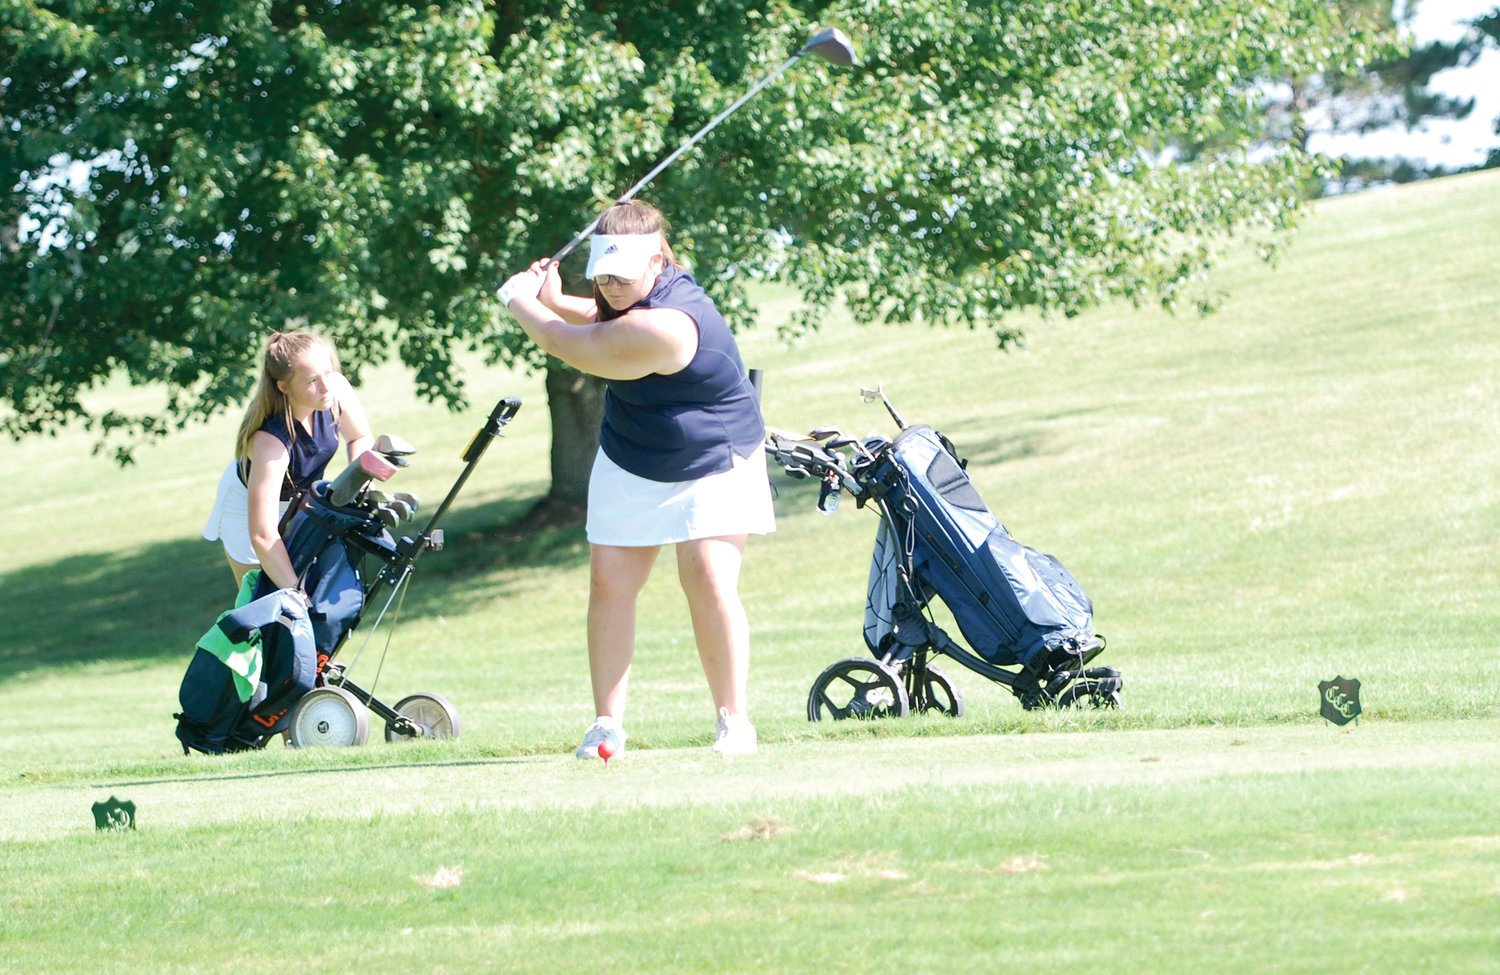 North Montgomery's Ella Stultz approaches her tee shot on No. 11 at the Crawfordsville Country Club Saturday afternoon. Stultz fired a 117 in the first meet of the season for the Chargers.